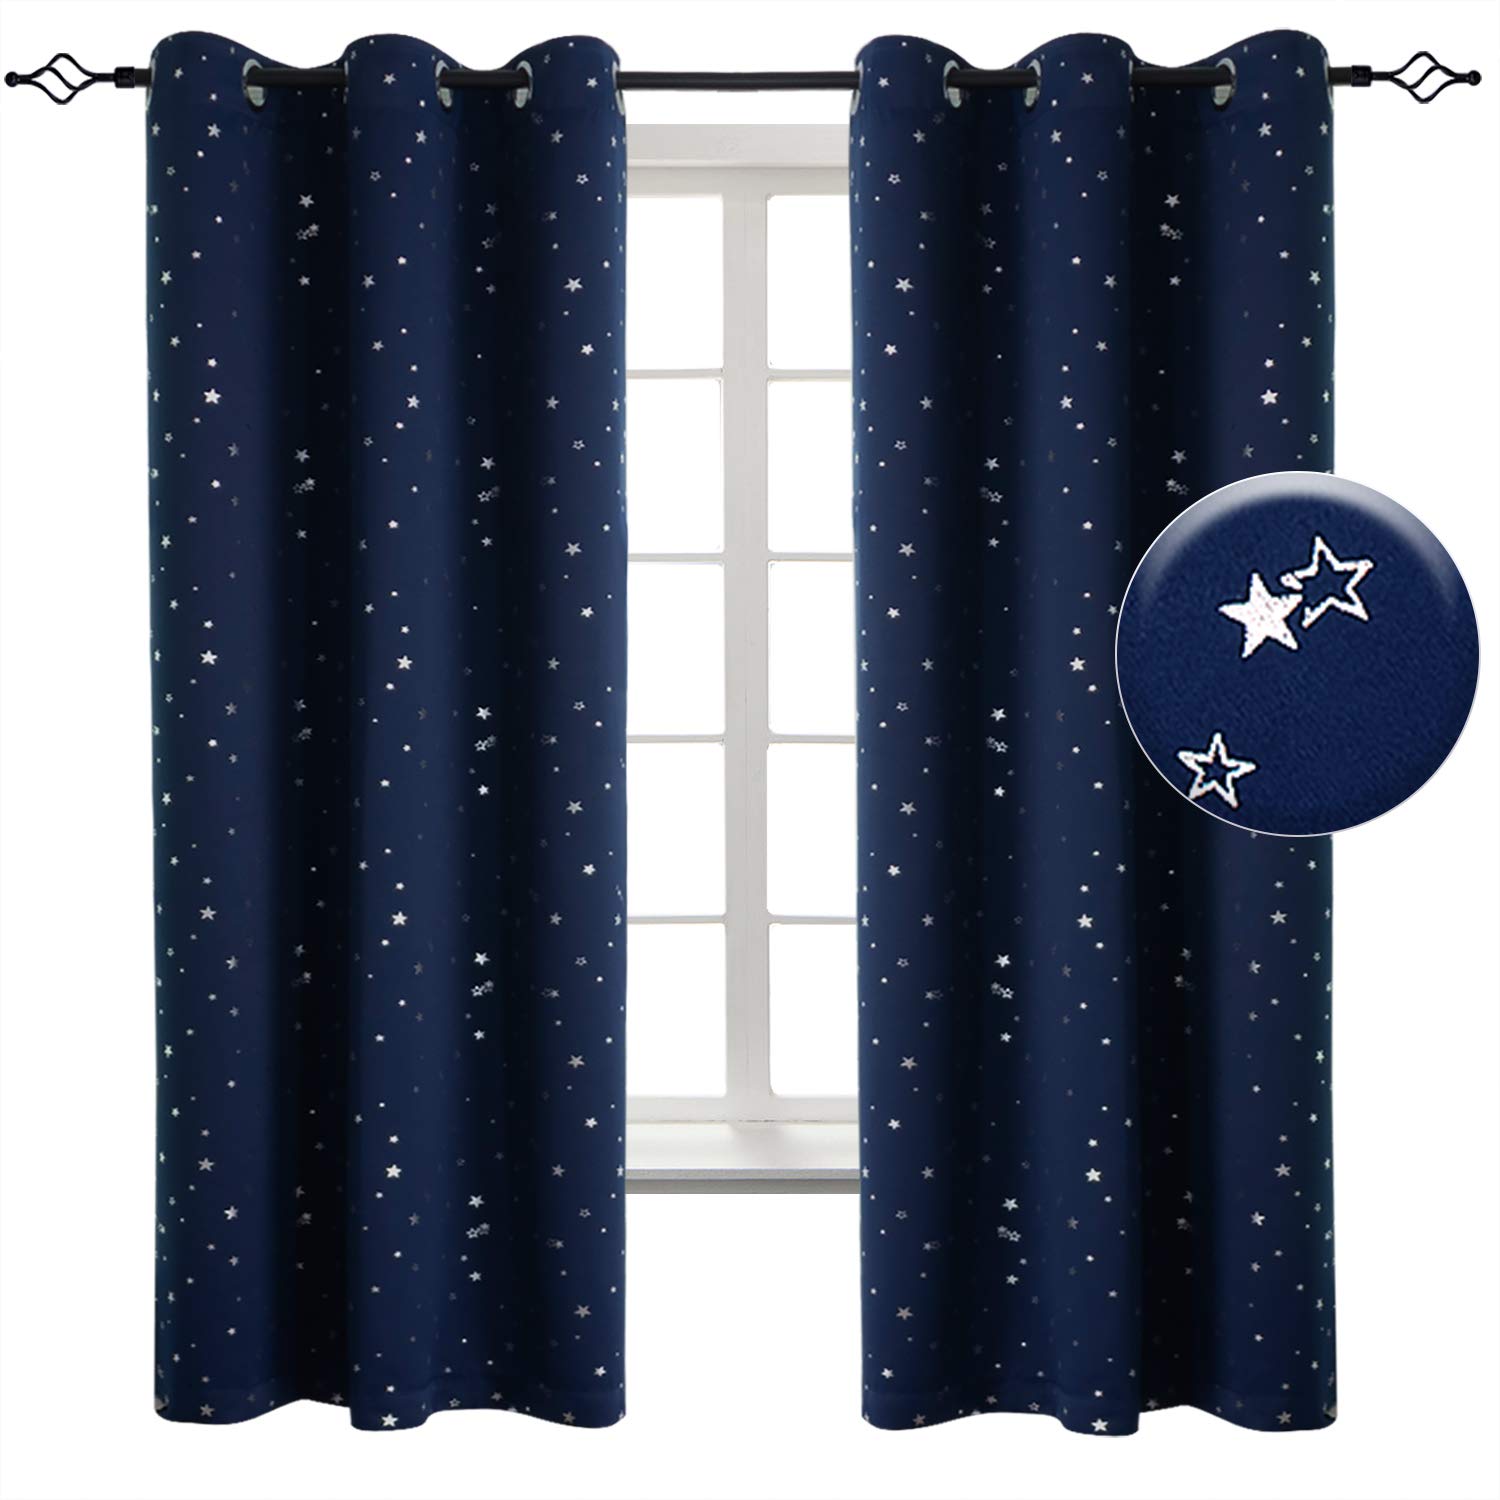 BGment Navy Star Blackout Curtains for Kid's Bedroom 